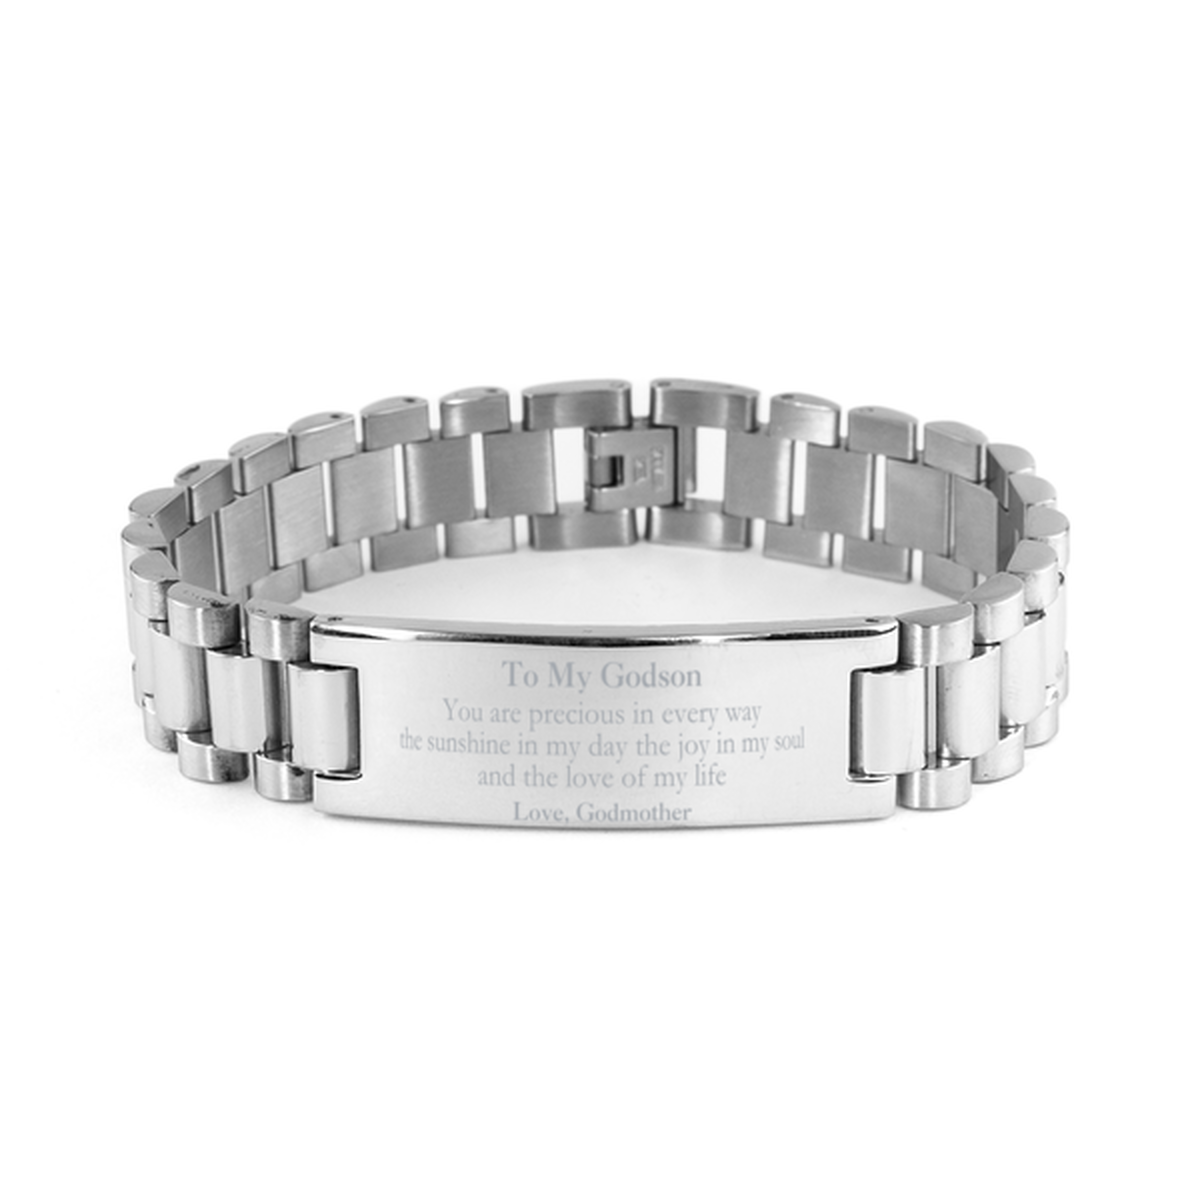 Graduation Gifts for Godson Ladder Stainless Steel Bracelet Present from Godmother, Christmas Godson Birthday Gifts Godson You are precious in every way the sunshine in my day. Love, Godmother